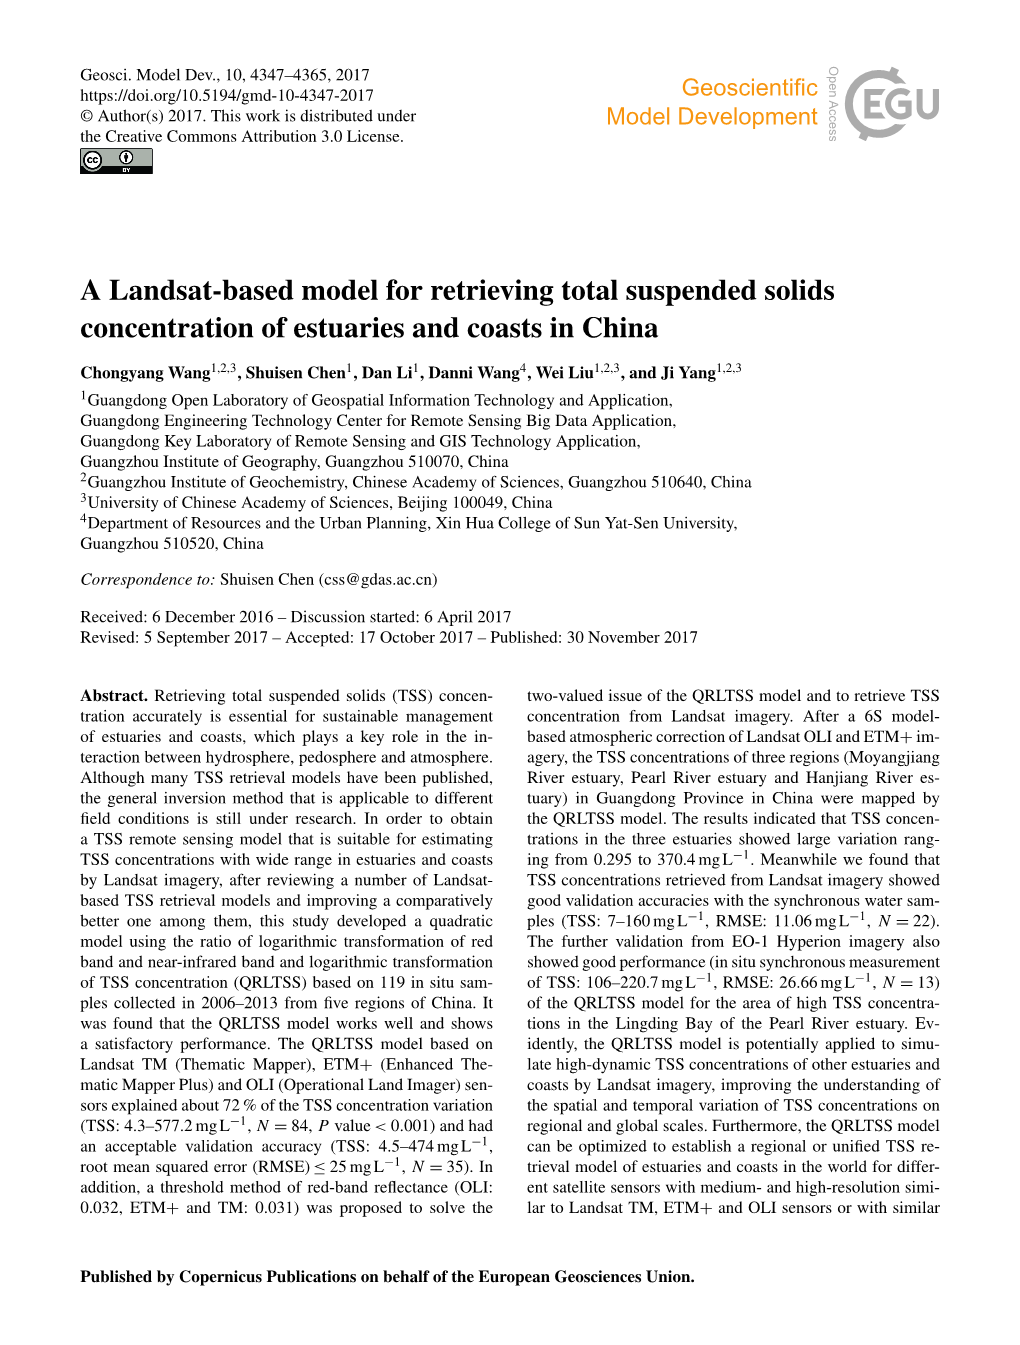 A Landsat-Based Model for Retrieving Total Suspended Solids Concentration of Estuaries and Coasts in China